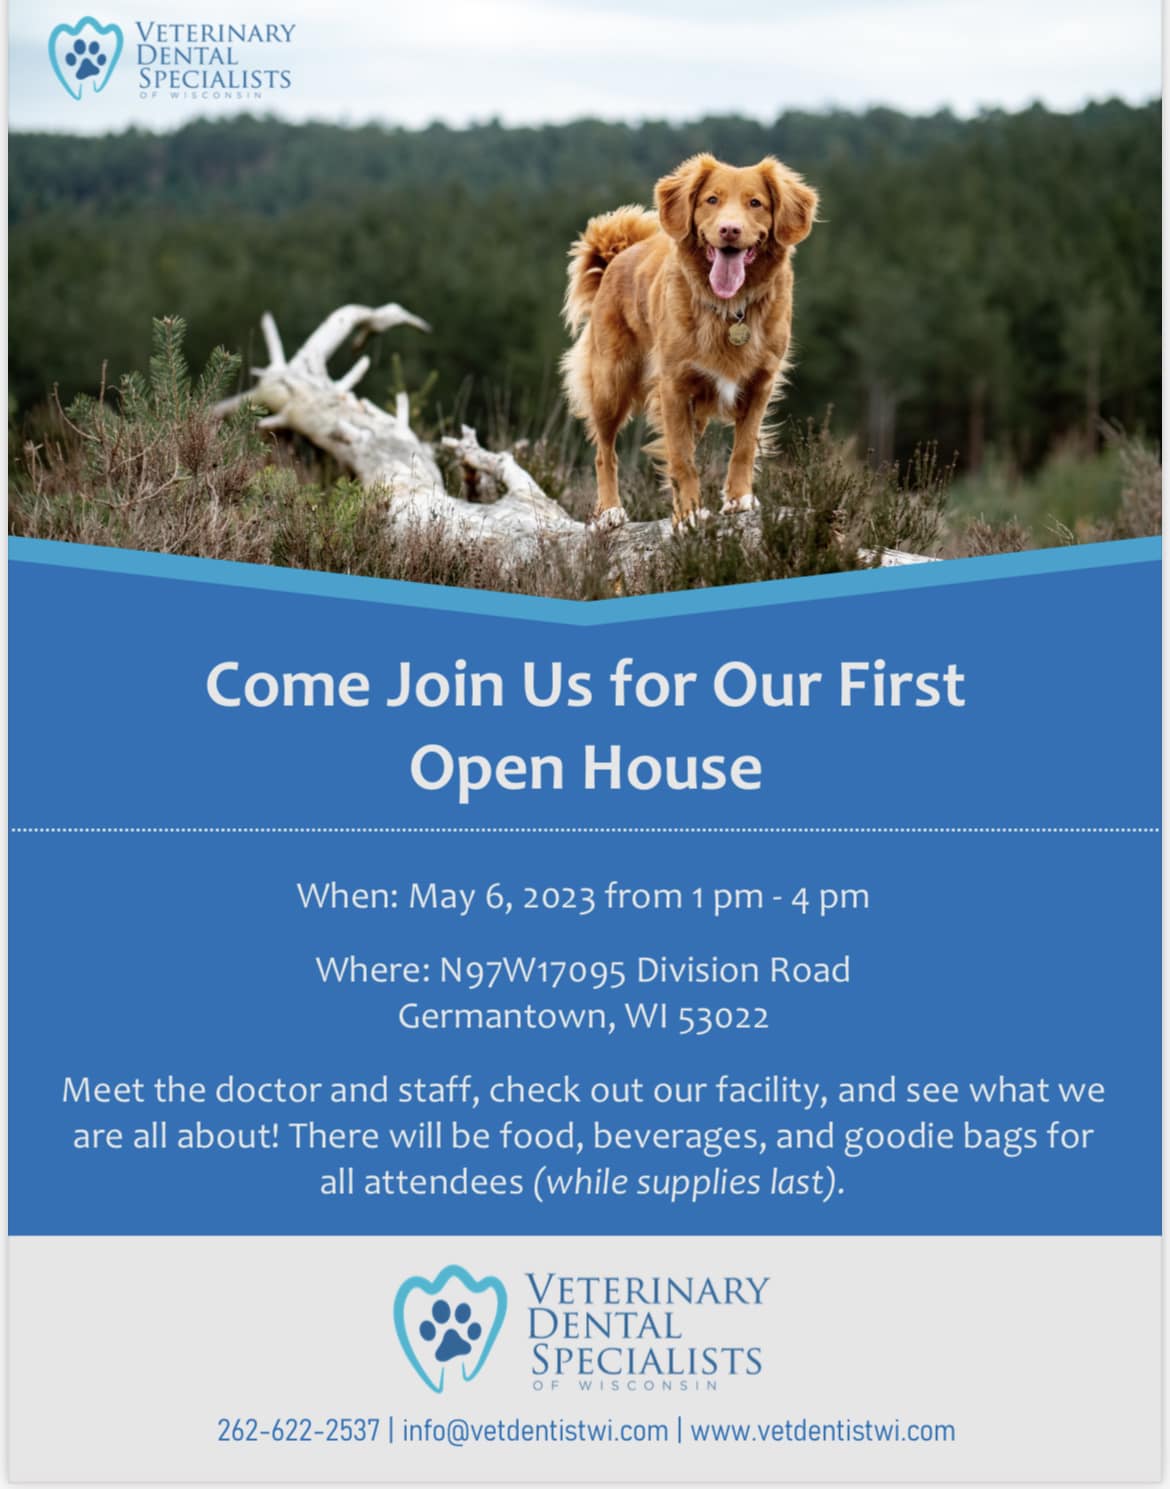 Open House Event Flyer for Veterinary Dental Specialists of Wisconsin